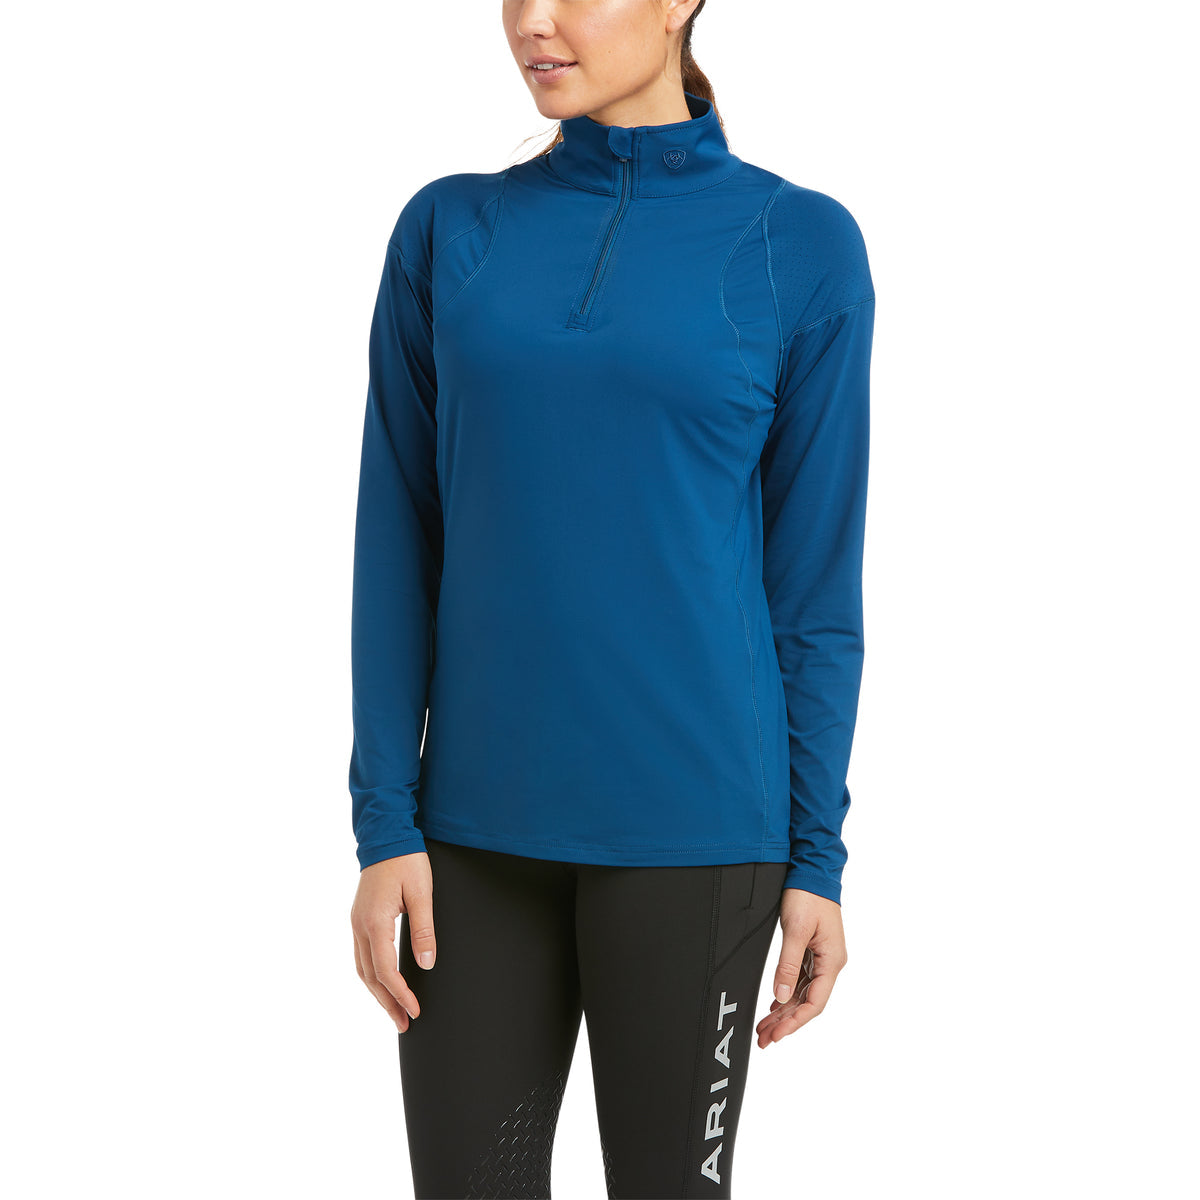 Ariat Auburn Baselayer-Trailrace Equestrian Outfitters-The Equestrian